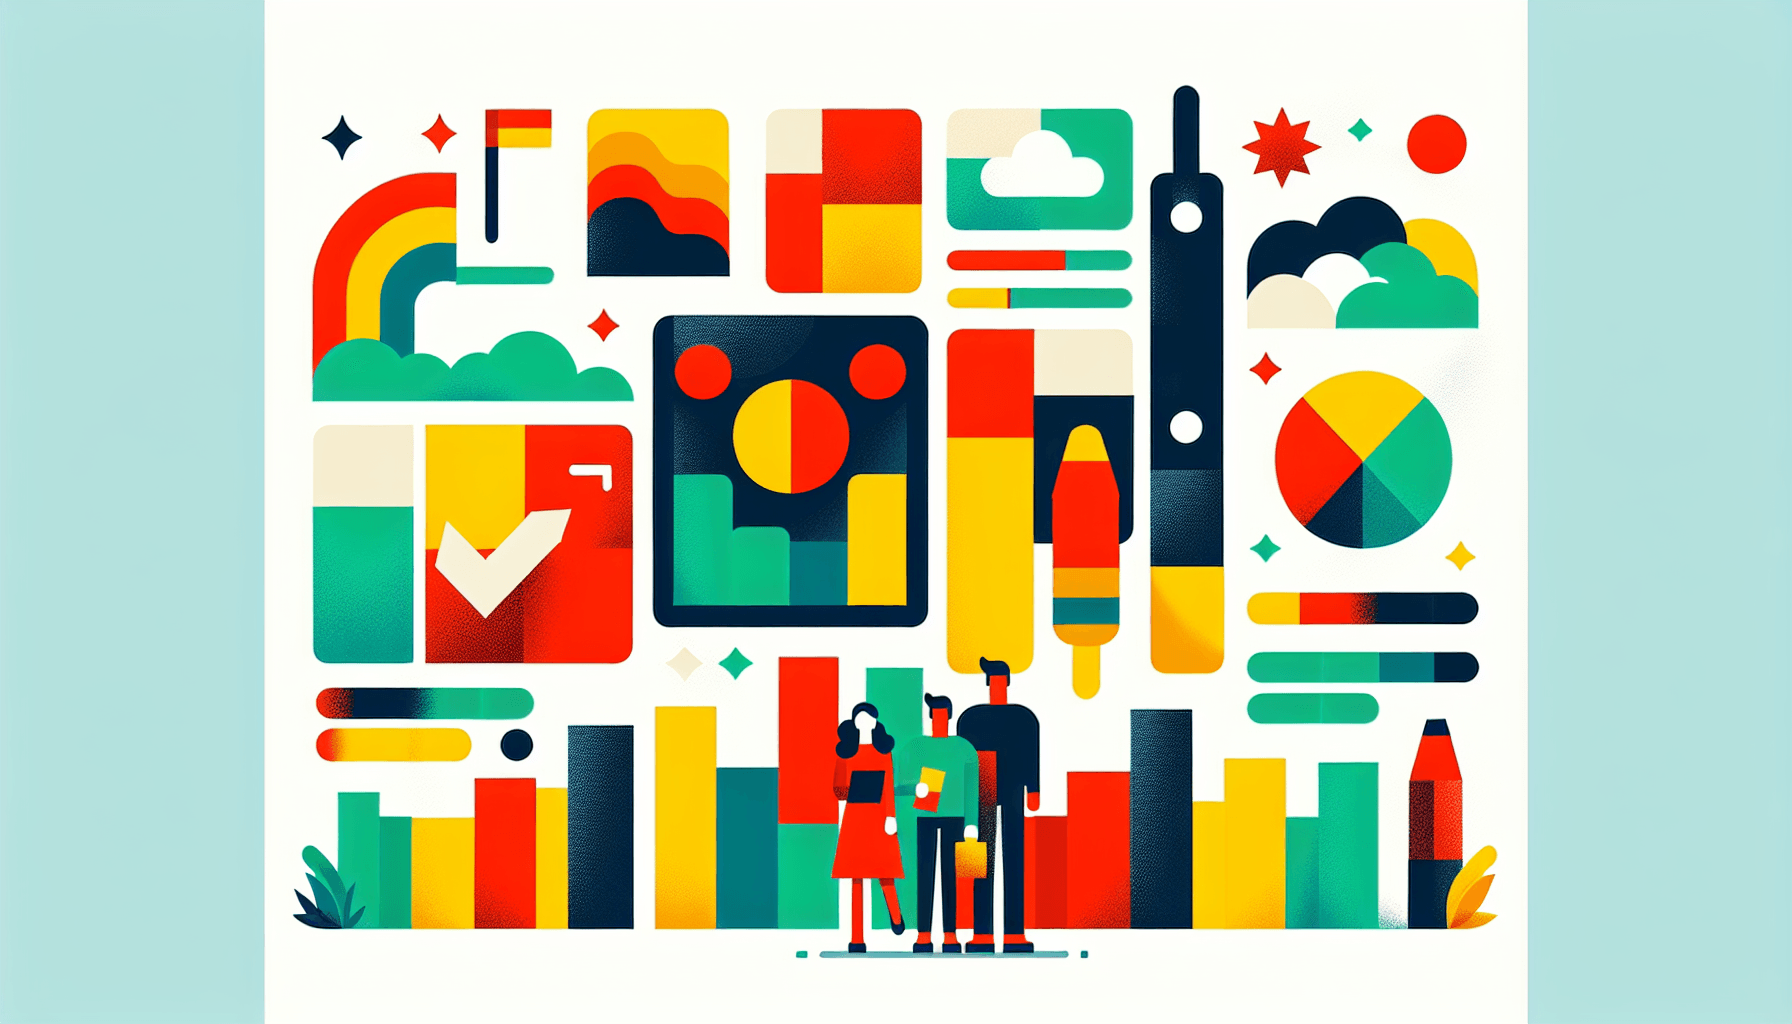 Survey in flat illustration style and white background, red #f47574, green #88c7a8, yellow #fcc44b, and blue #645bc8 colors.